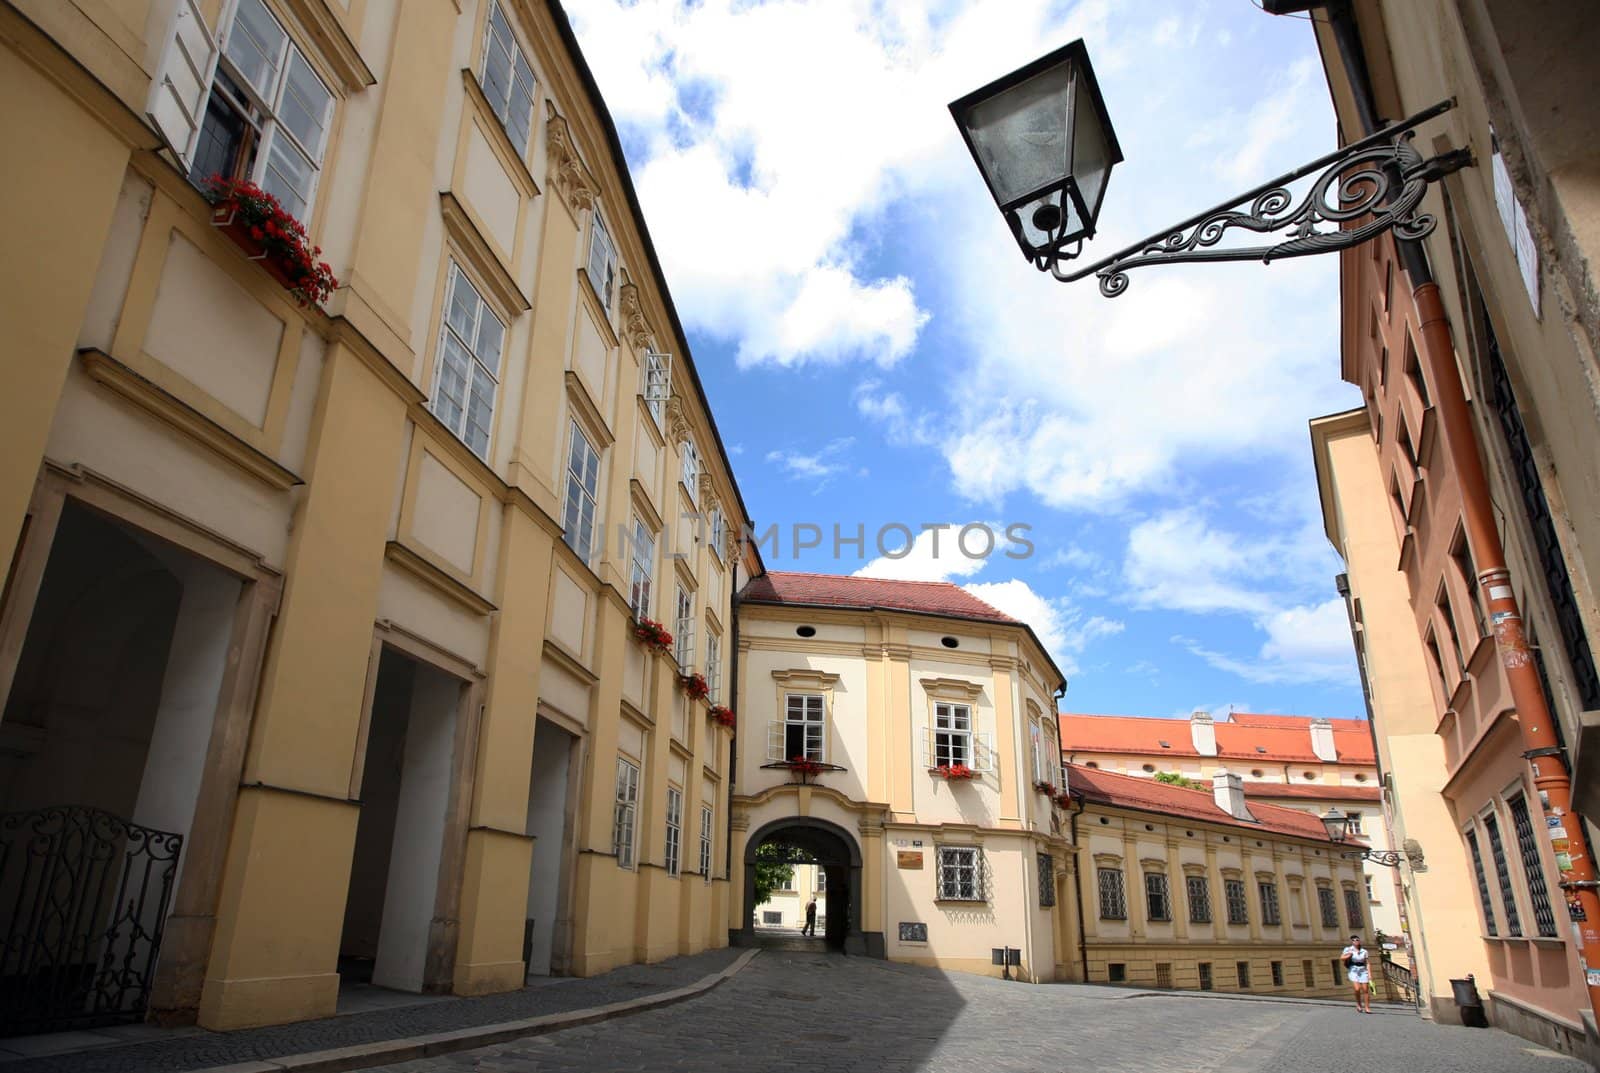 Guildhall in the center of Brno, Czech  republic